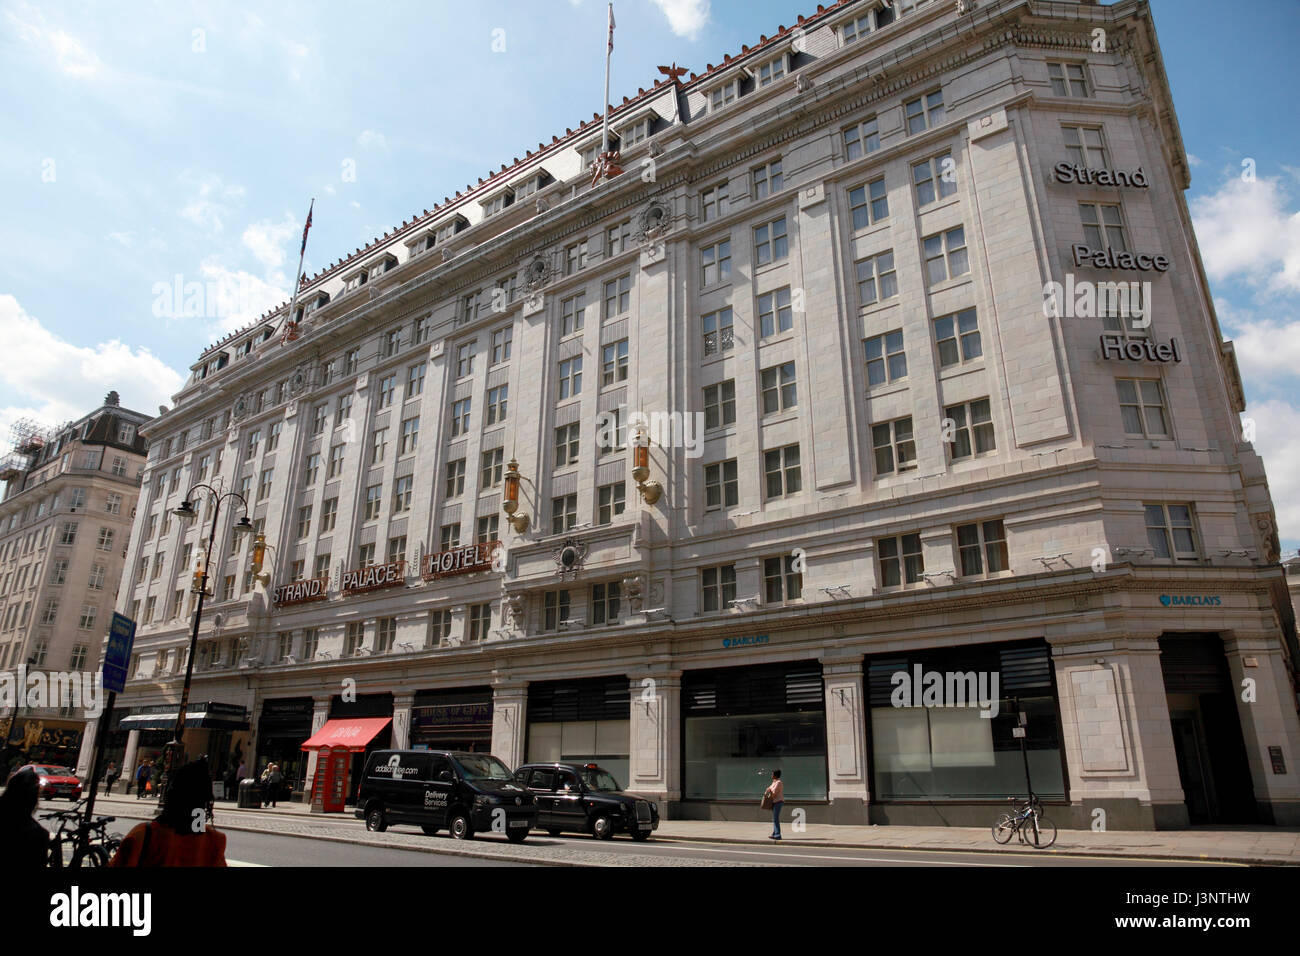 The Strand Palace Hotel on the north side of The Strand, central London Stock Photo